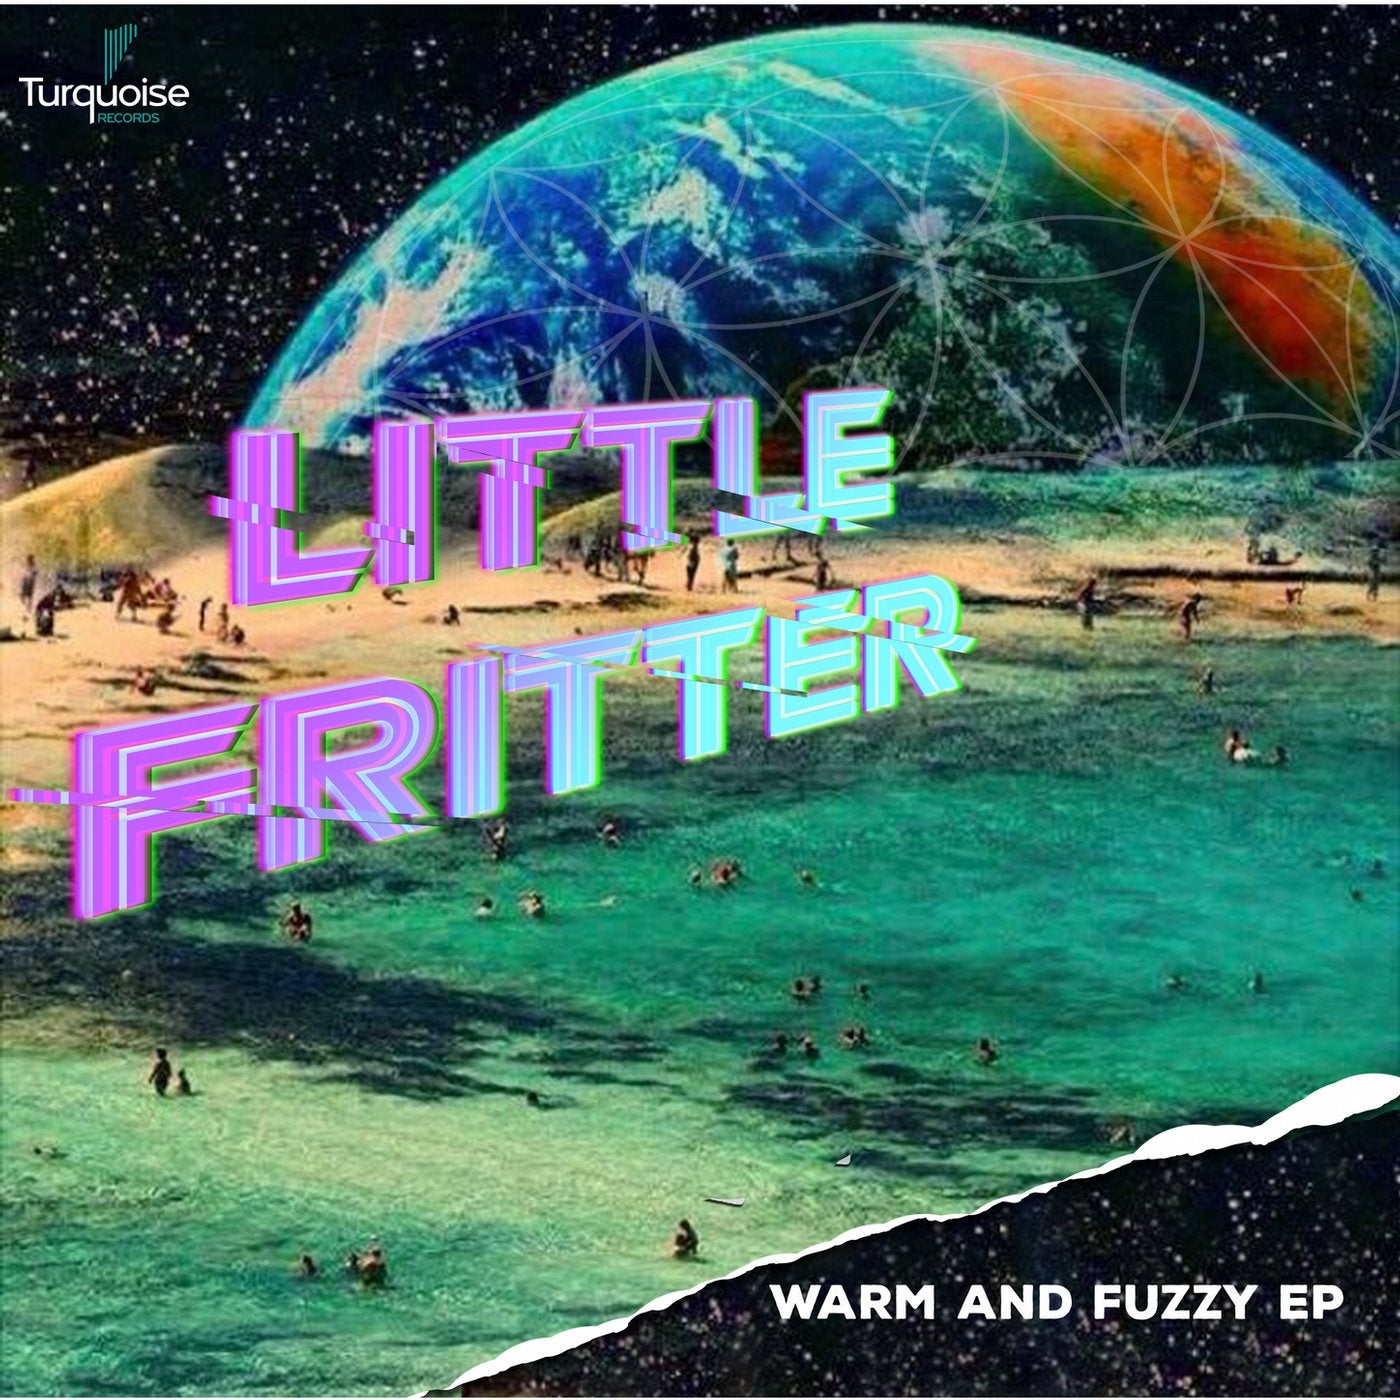 Warm and Fuzzy EP